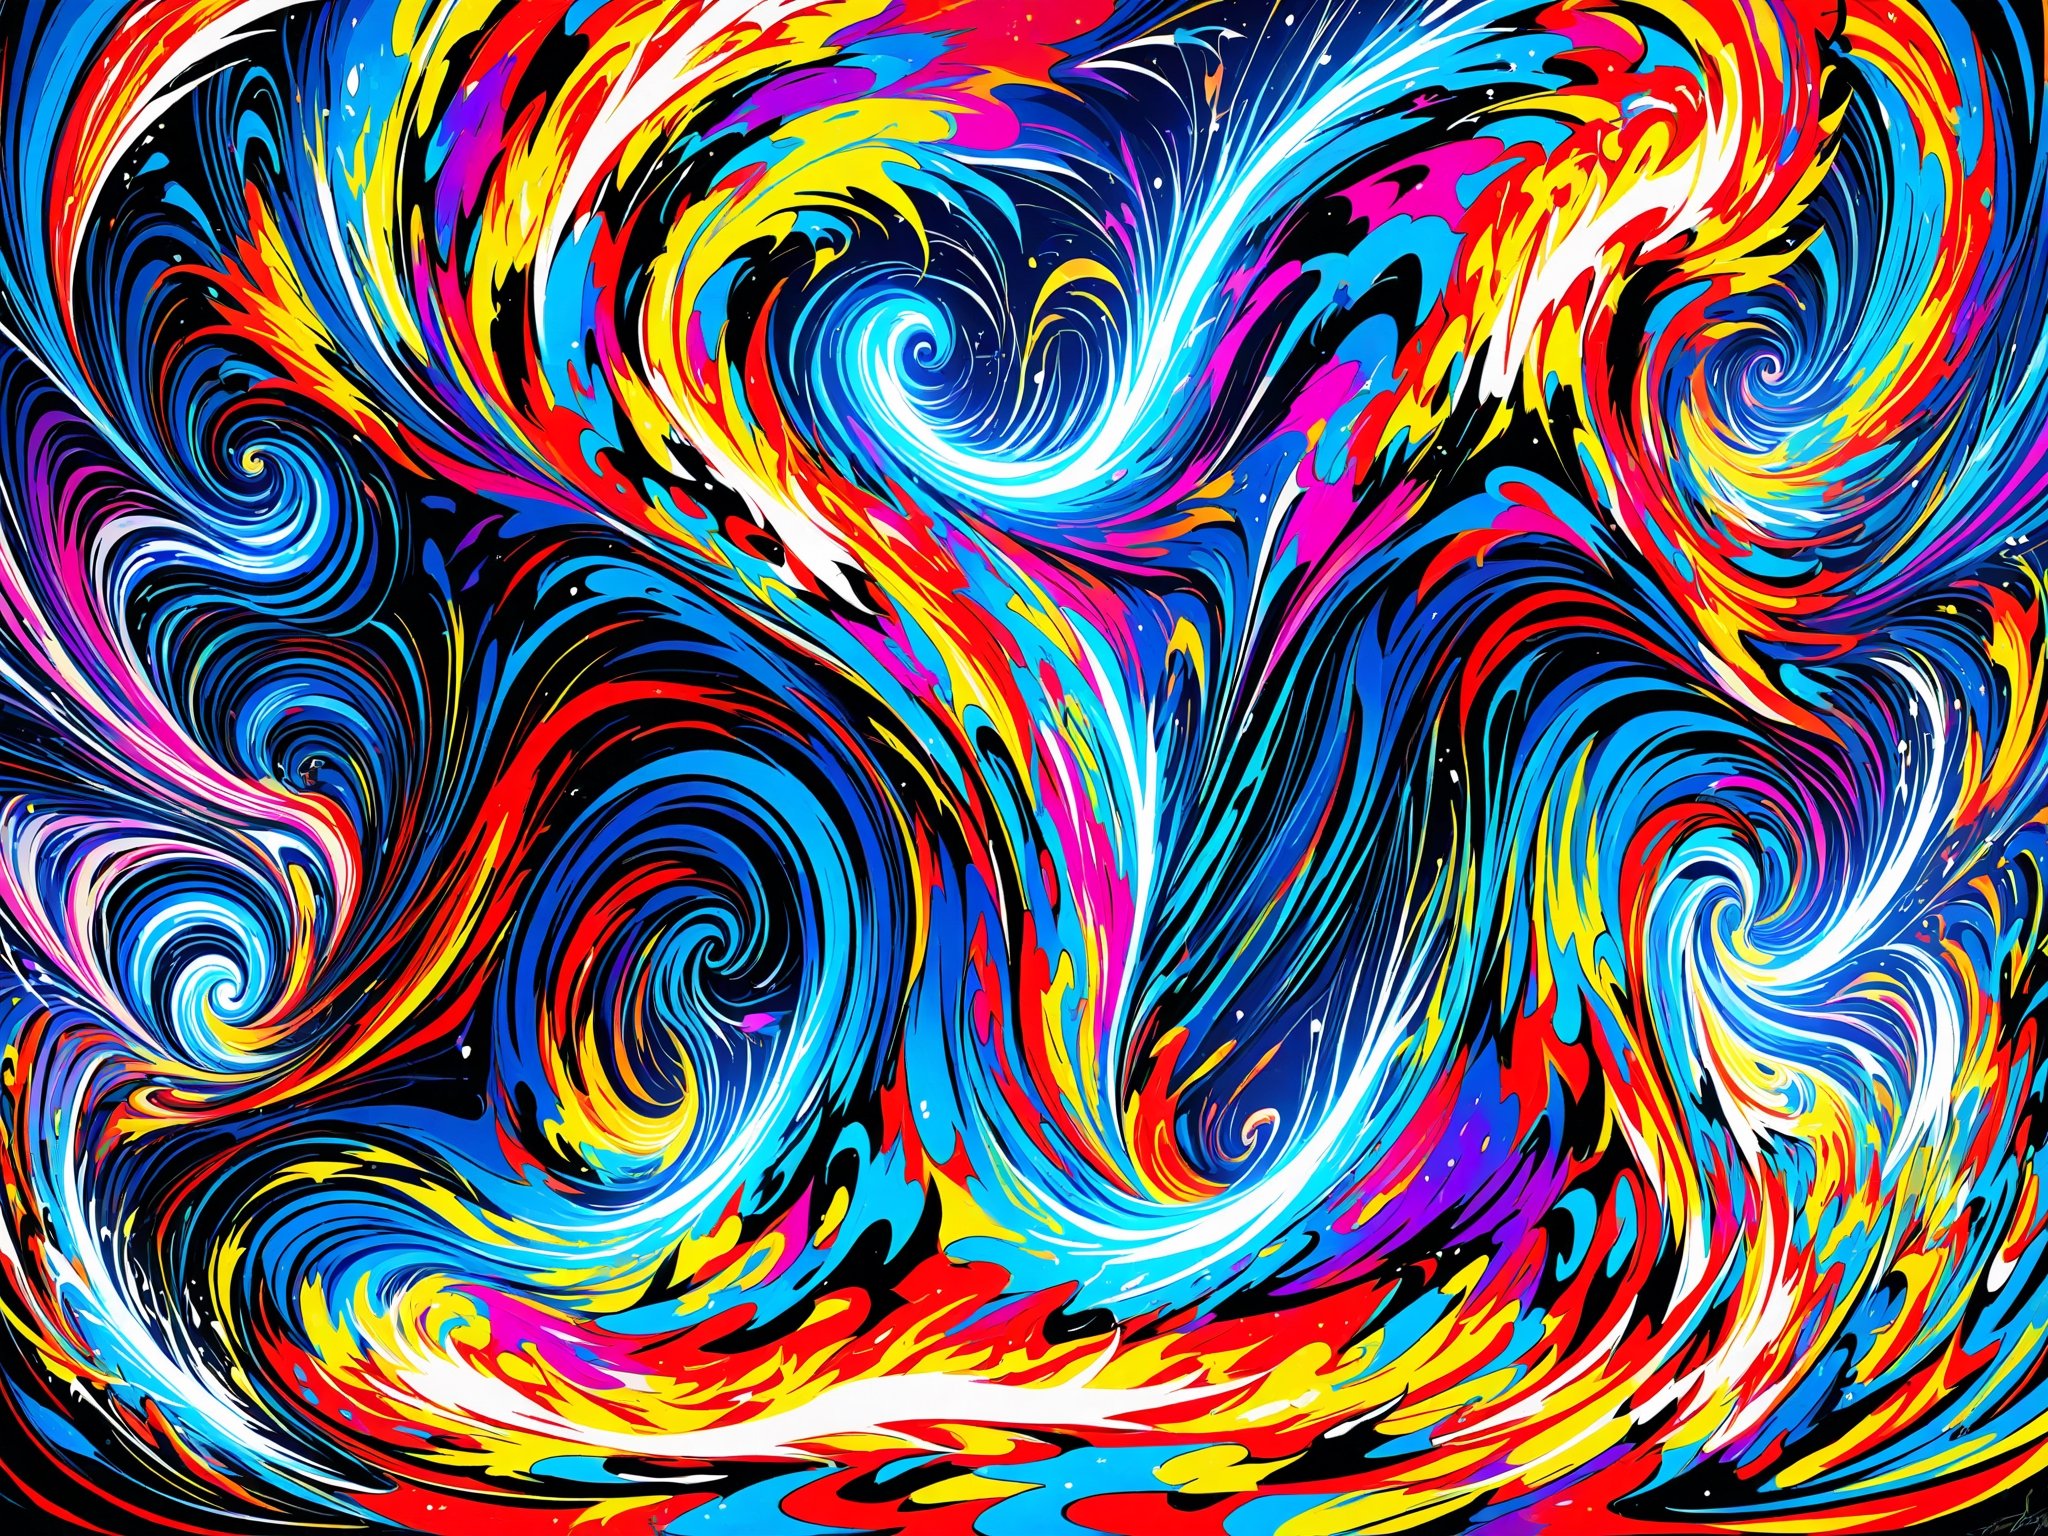 The multi-verse unfolds before you like an origami nightmare in reverse, collapsing and expanding at the same time, thunderous waves of psychedelic seismic space energy pulse and churn as a vortex of madness takes indescribable form, a truly breathtaking sight to behold like a hurricane of colors and a tornado of lightning and fire collided at full speed force and we are in the eye of the psychedelic swirling chaotic colorswirling trippy tempest, everything is so energized its vibrating everything everywhere is all squiggly distorted vibratory visual effects, populate the swirling insanity with crazy things trapped in the vortex like in that movie twister but way more insane fucked up shit, ultra colors, hyper sky, incredibly intricate intense almost nauseating constant motion and vibratuon and too many too bright colors, in Jesus christ name we pray, absurdres amen 